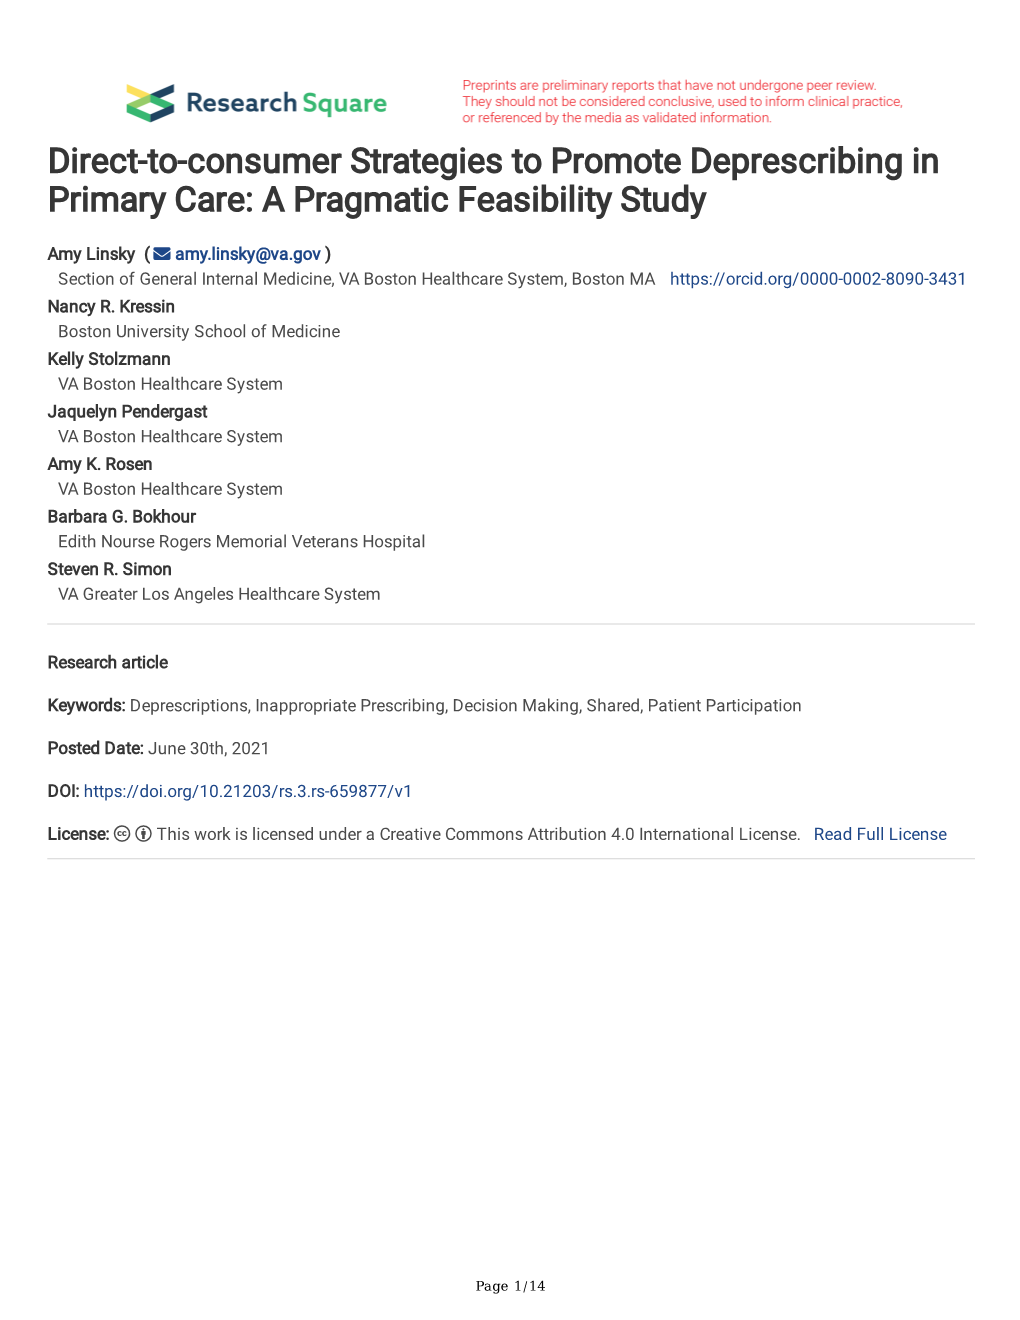 Direct-To-Consumer Strategies to Promote Deprescribing in Primary Care: a Pragmatic Feasibility Study